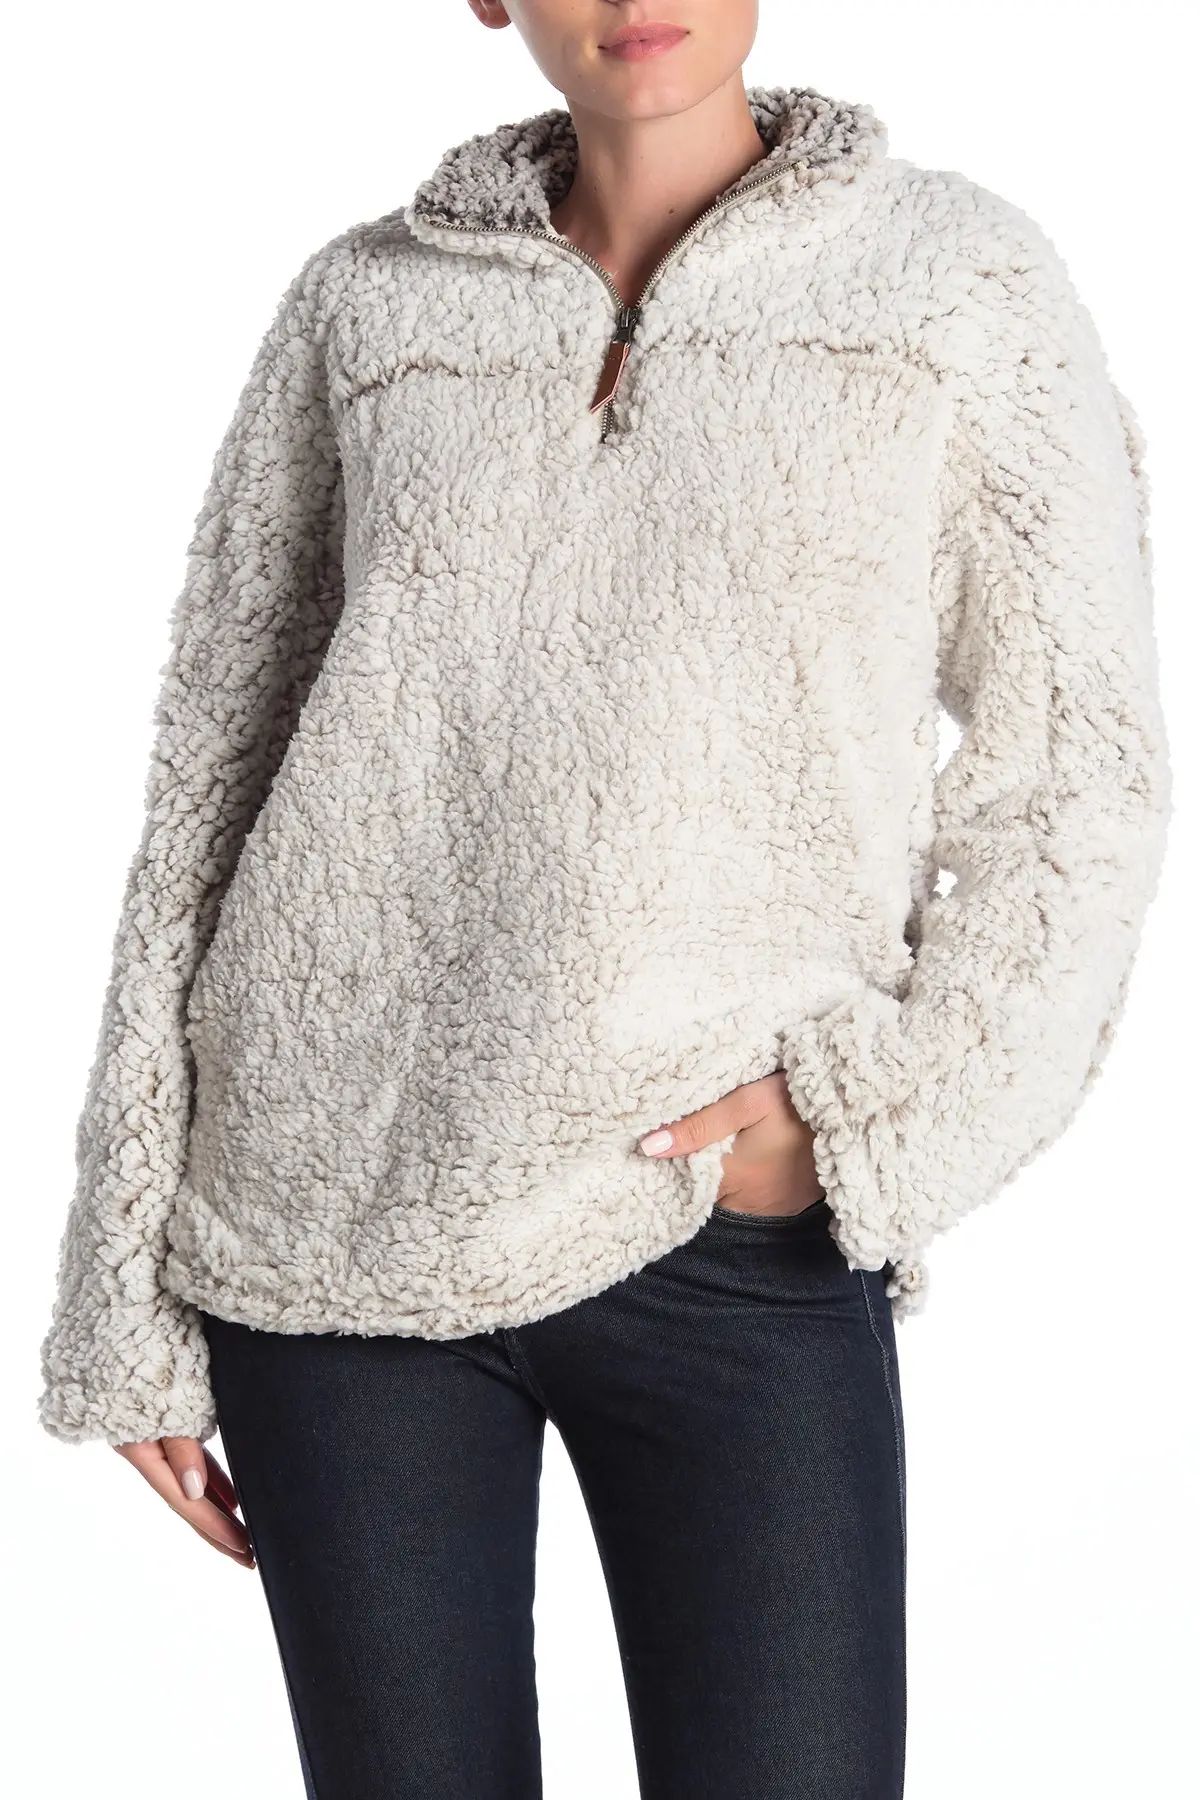 THREAD AND SUPPLY Lazy Sunday Faux Shearling Quarter Zip Pullover at Nordstrom Rack | Nordstrom Rack